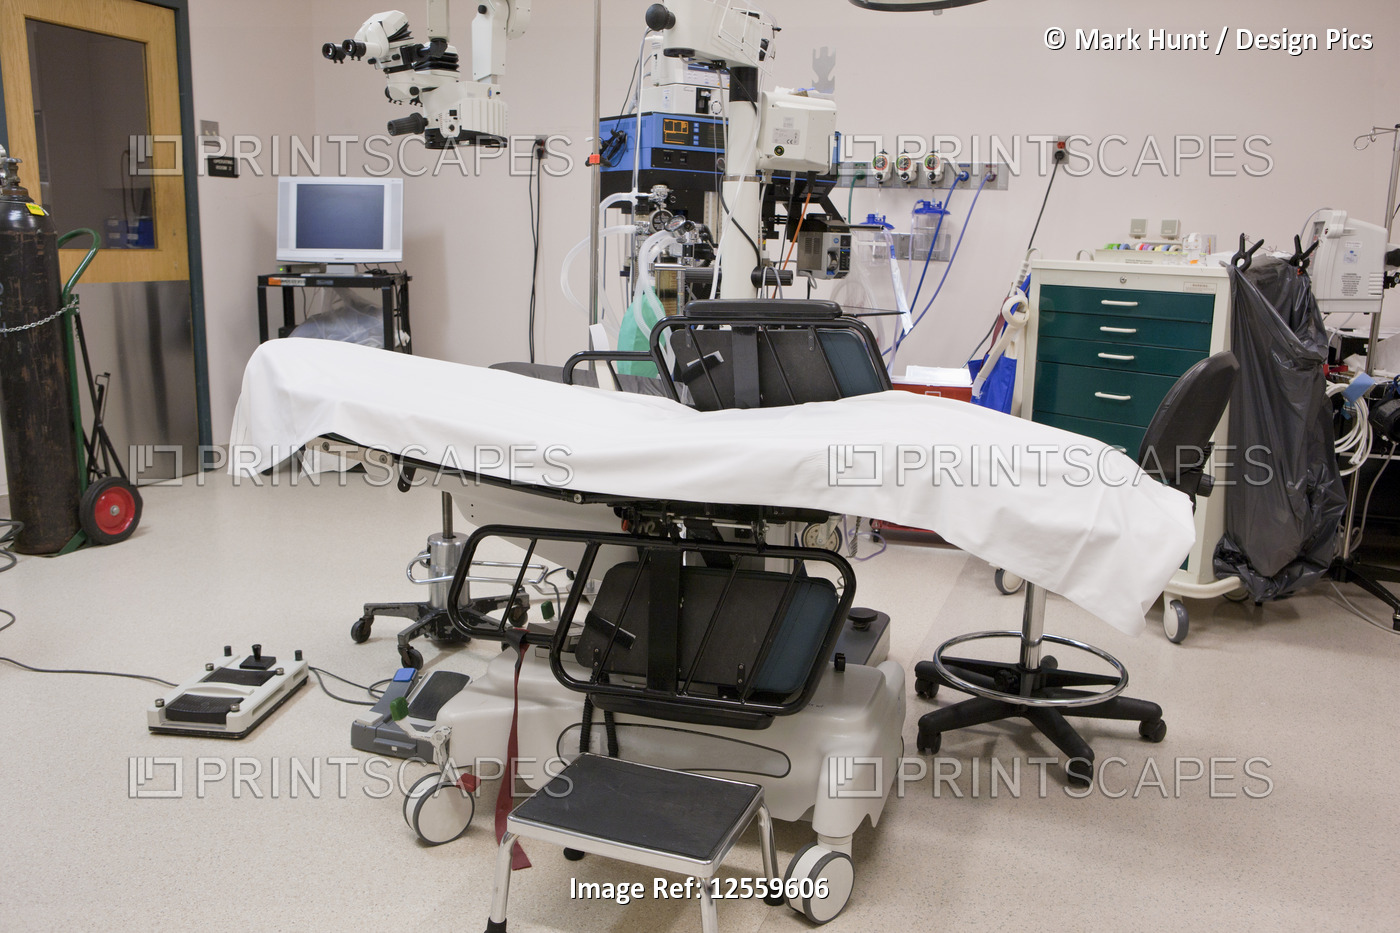 Interiors of an operating room